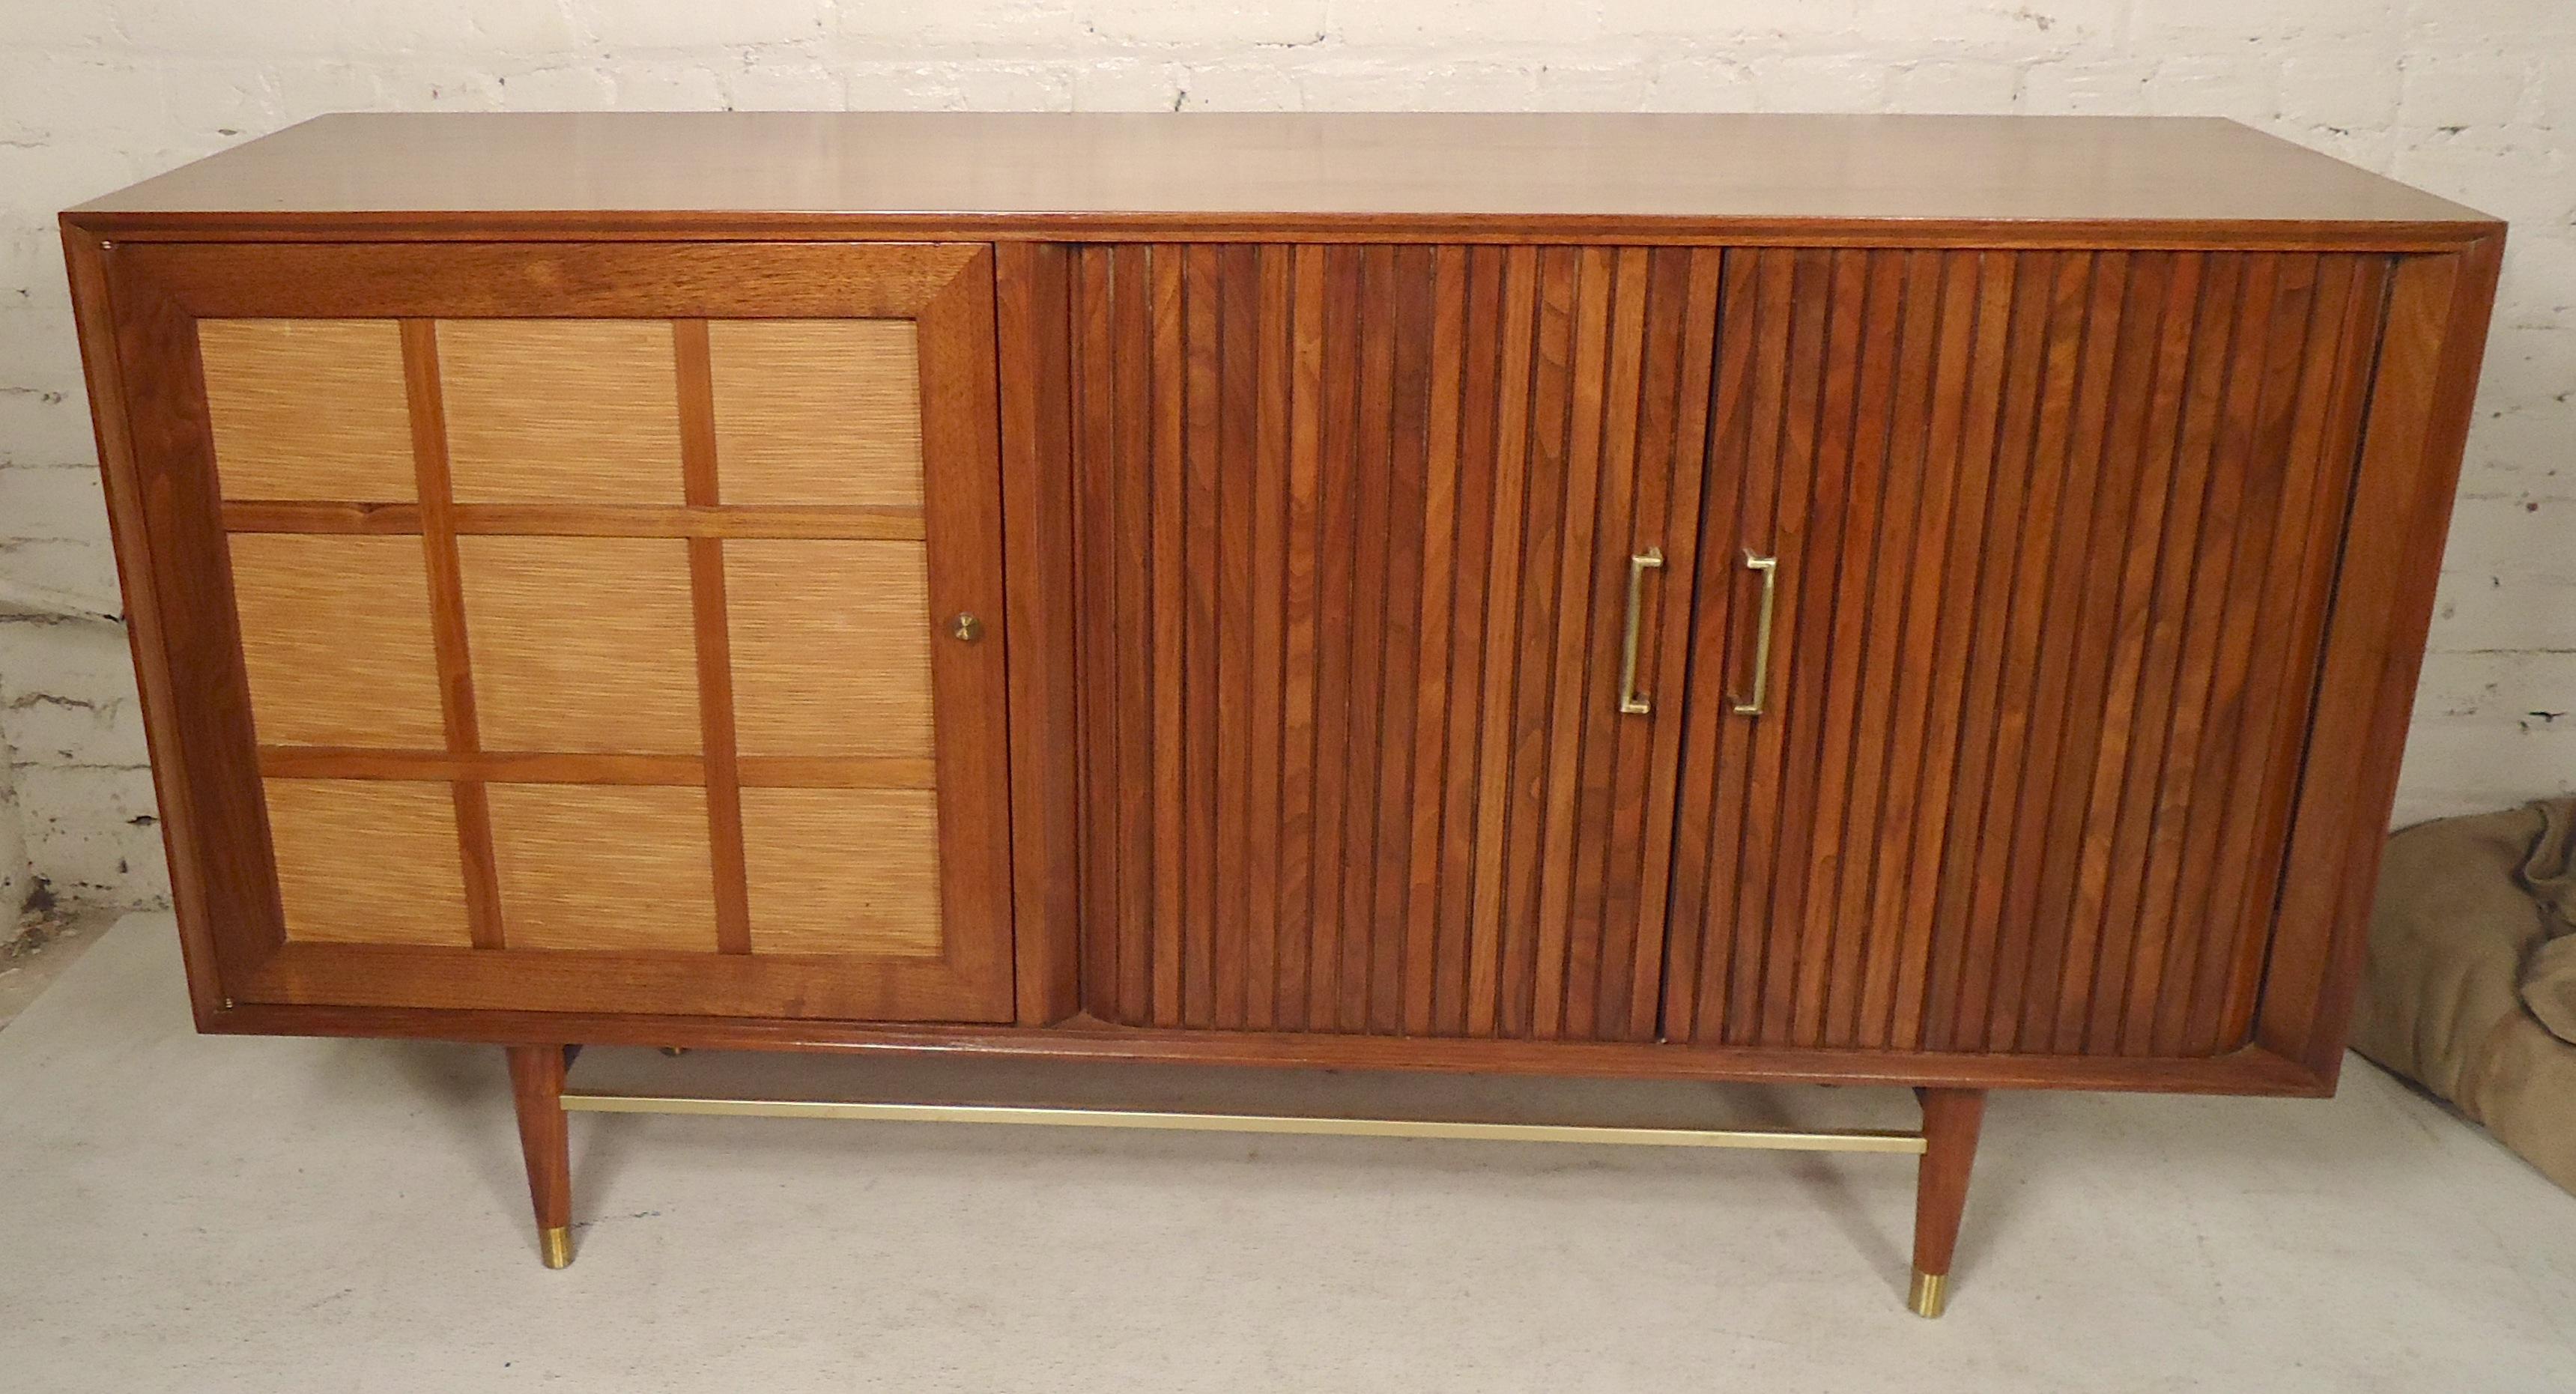 Vintage walnut cabinet with both open storage and drawers. Brass hardware, tambour door doors that recede into the back. Great for bedroom or living room.

(Please confirm item location - NY or NJ - with dealer).
 